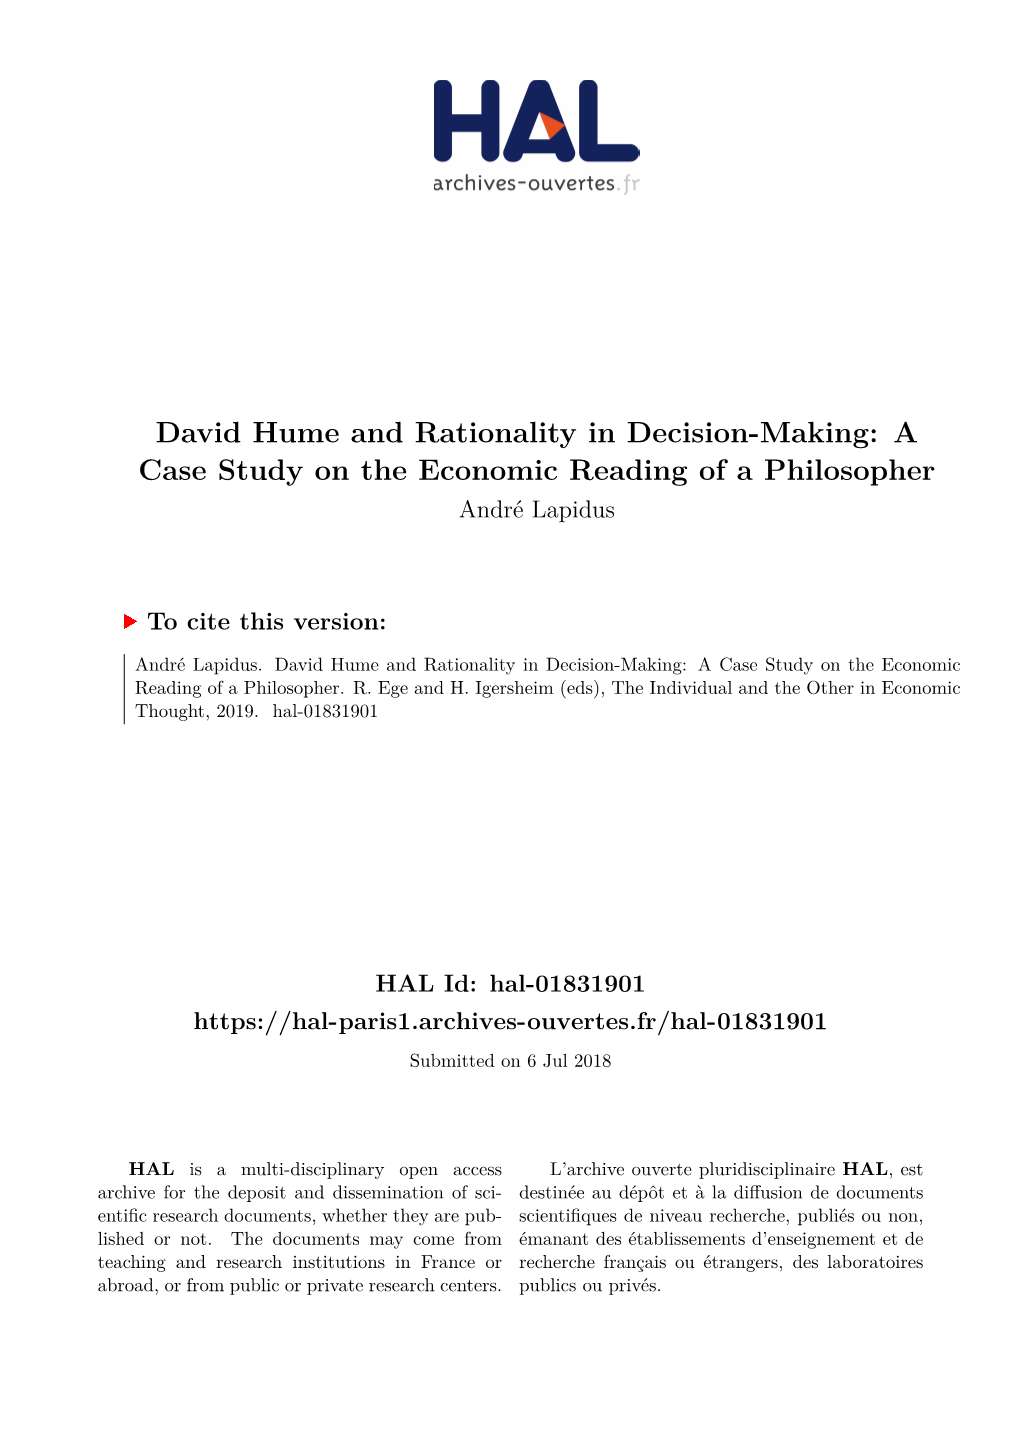 David Hume and Rationality in Decision-Making: a Case Study on the Economic Reading of a Philosopher André Lapidus